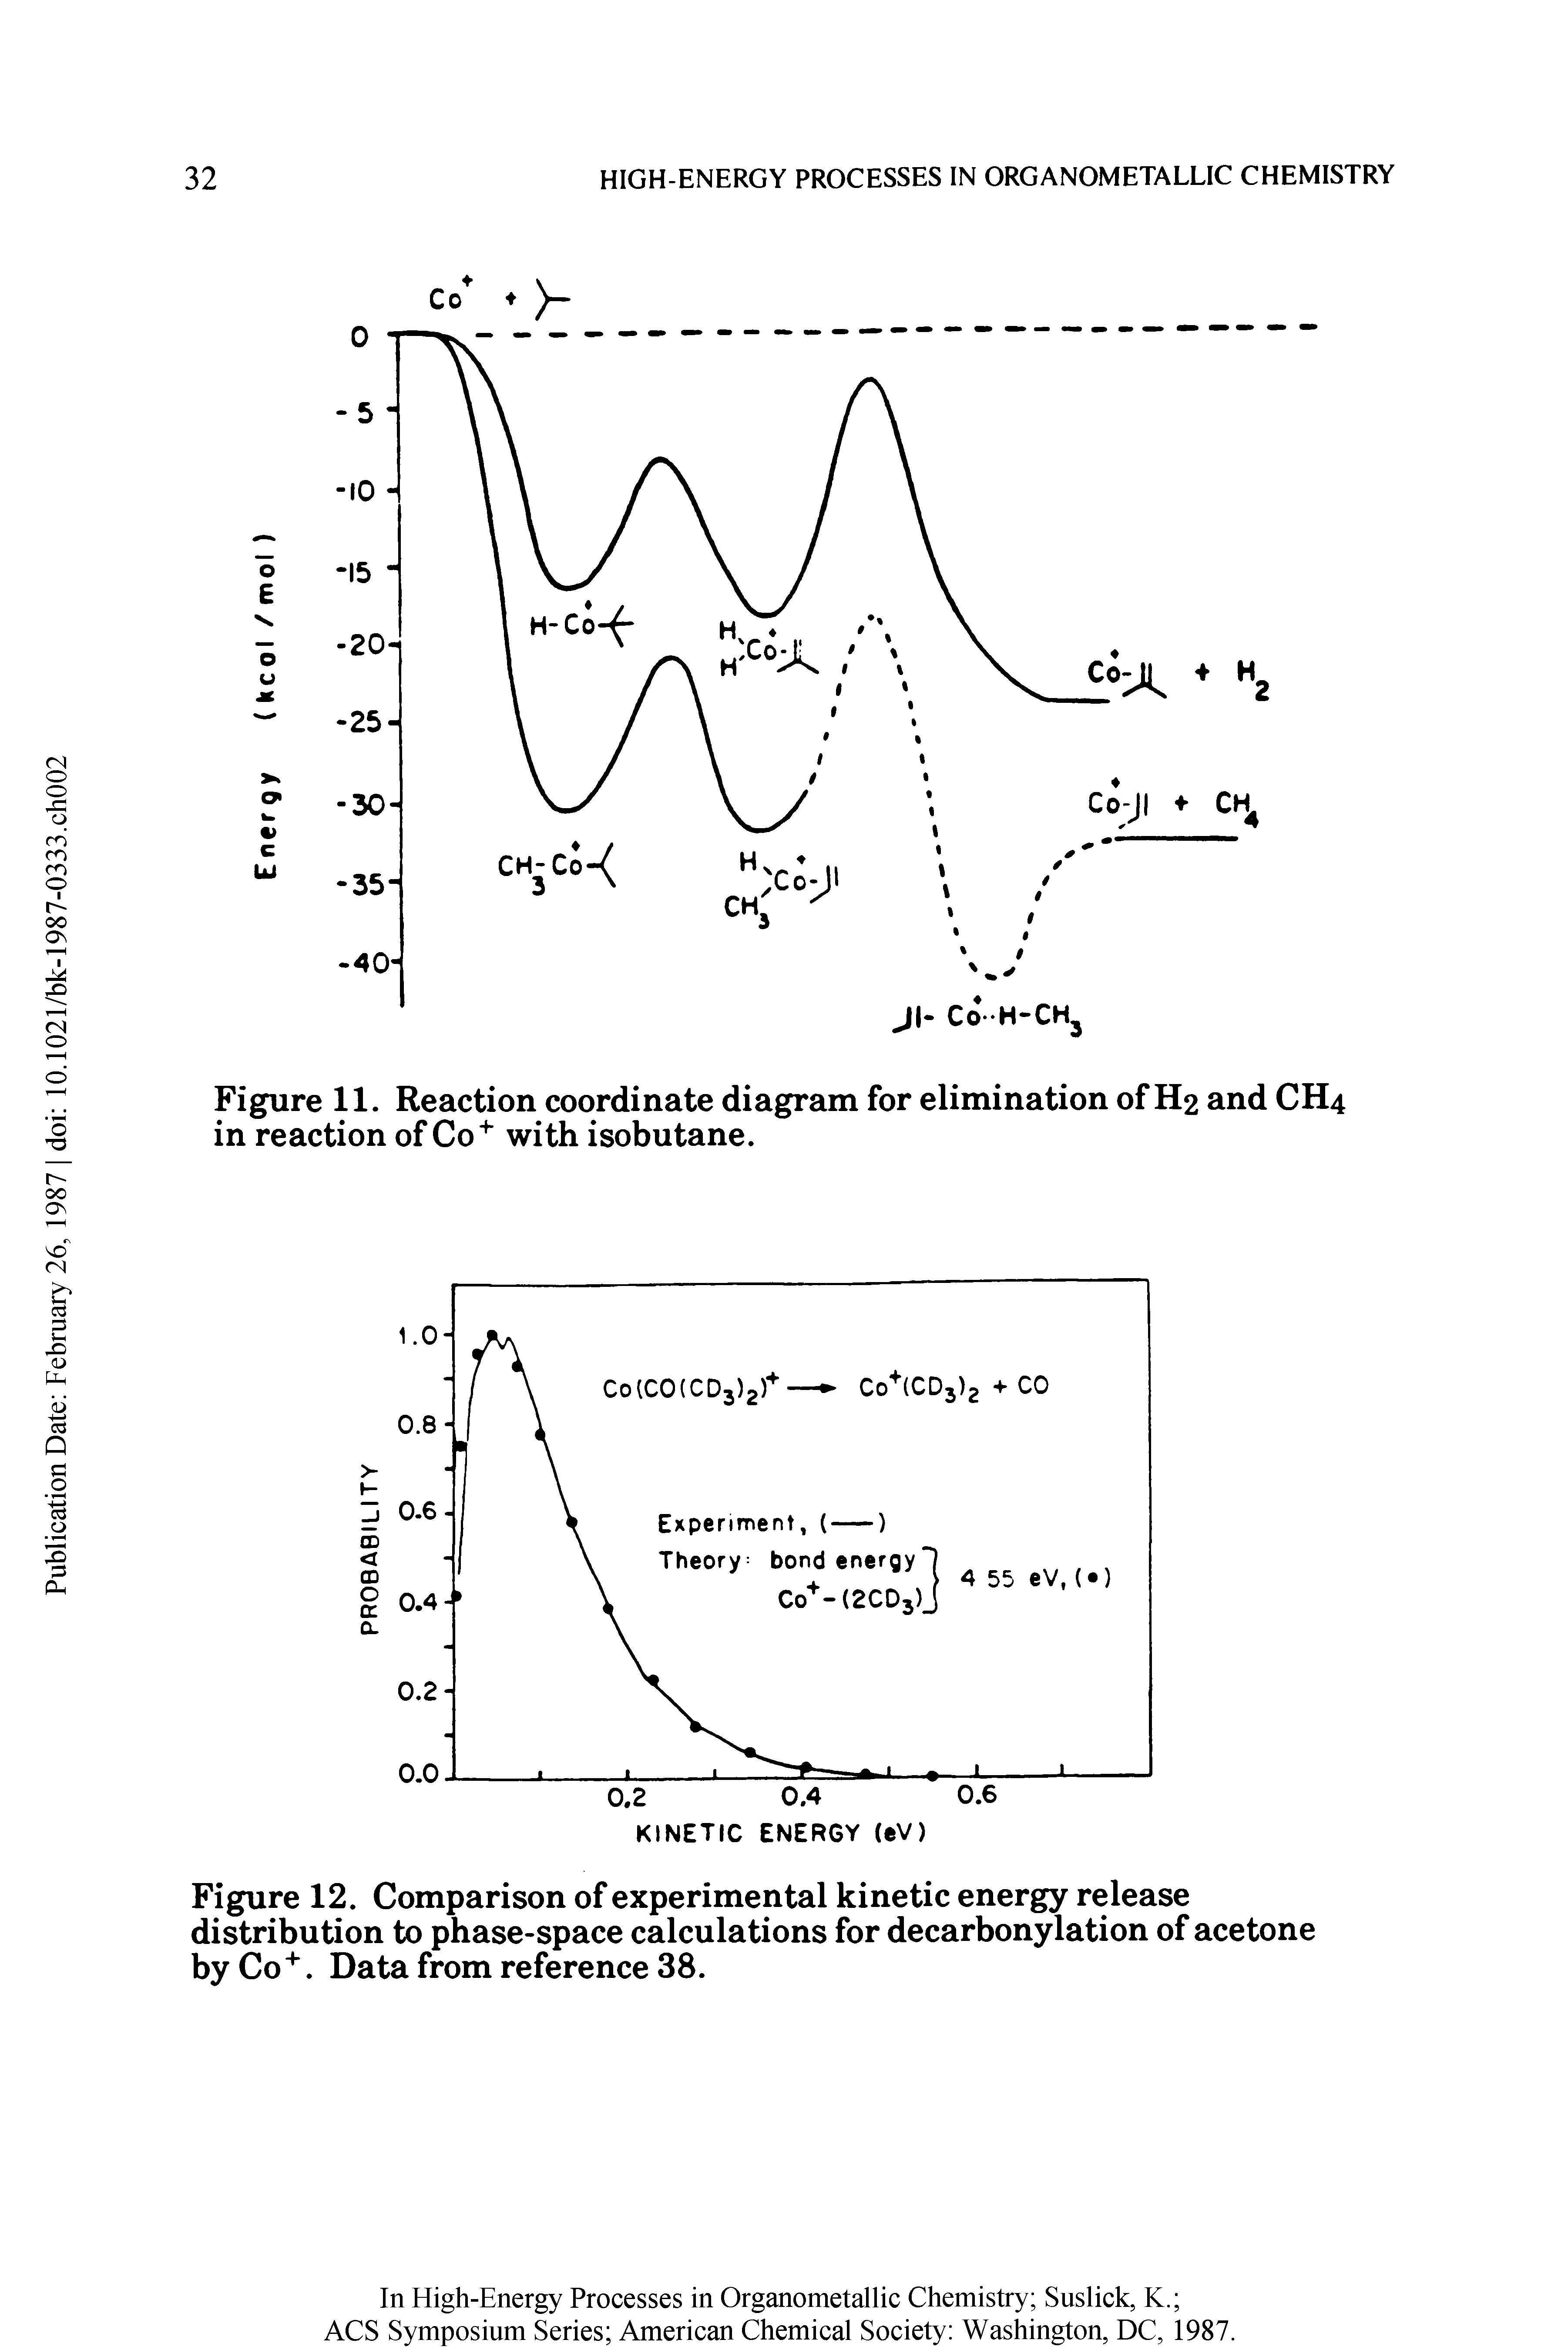 Figure 11. Reaction coordinate diagram for elimination of H2 and CH4 in reaction of Co+ with isobutane.